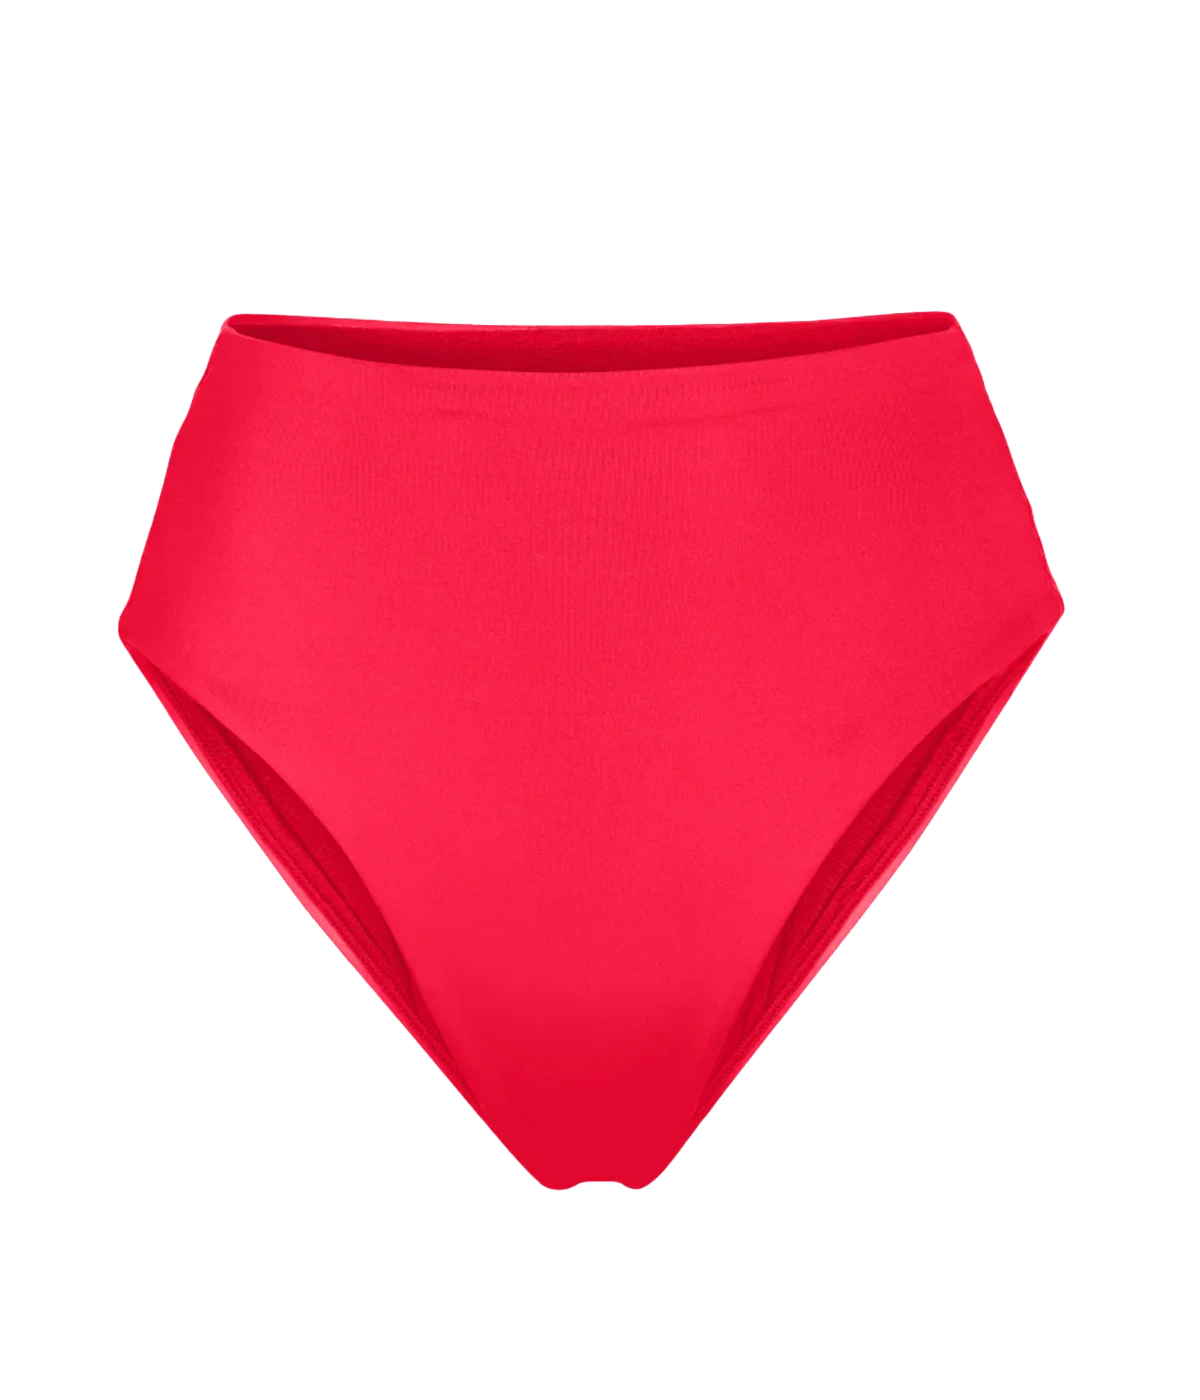 Reminiscent of the nineties, this Left on Friday bikini brief is your perfect summer companion. Made of compressive fabric, feel supported as you jump into the water. High cut for an elongated leg line, these bottoms are flattering and sexy. A gorgeous bright red addition to your swimwear collection.